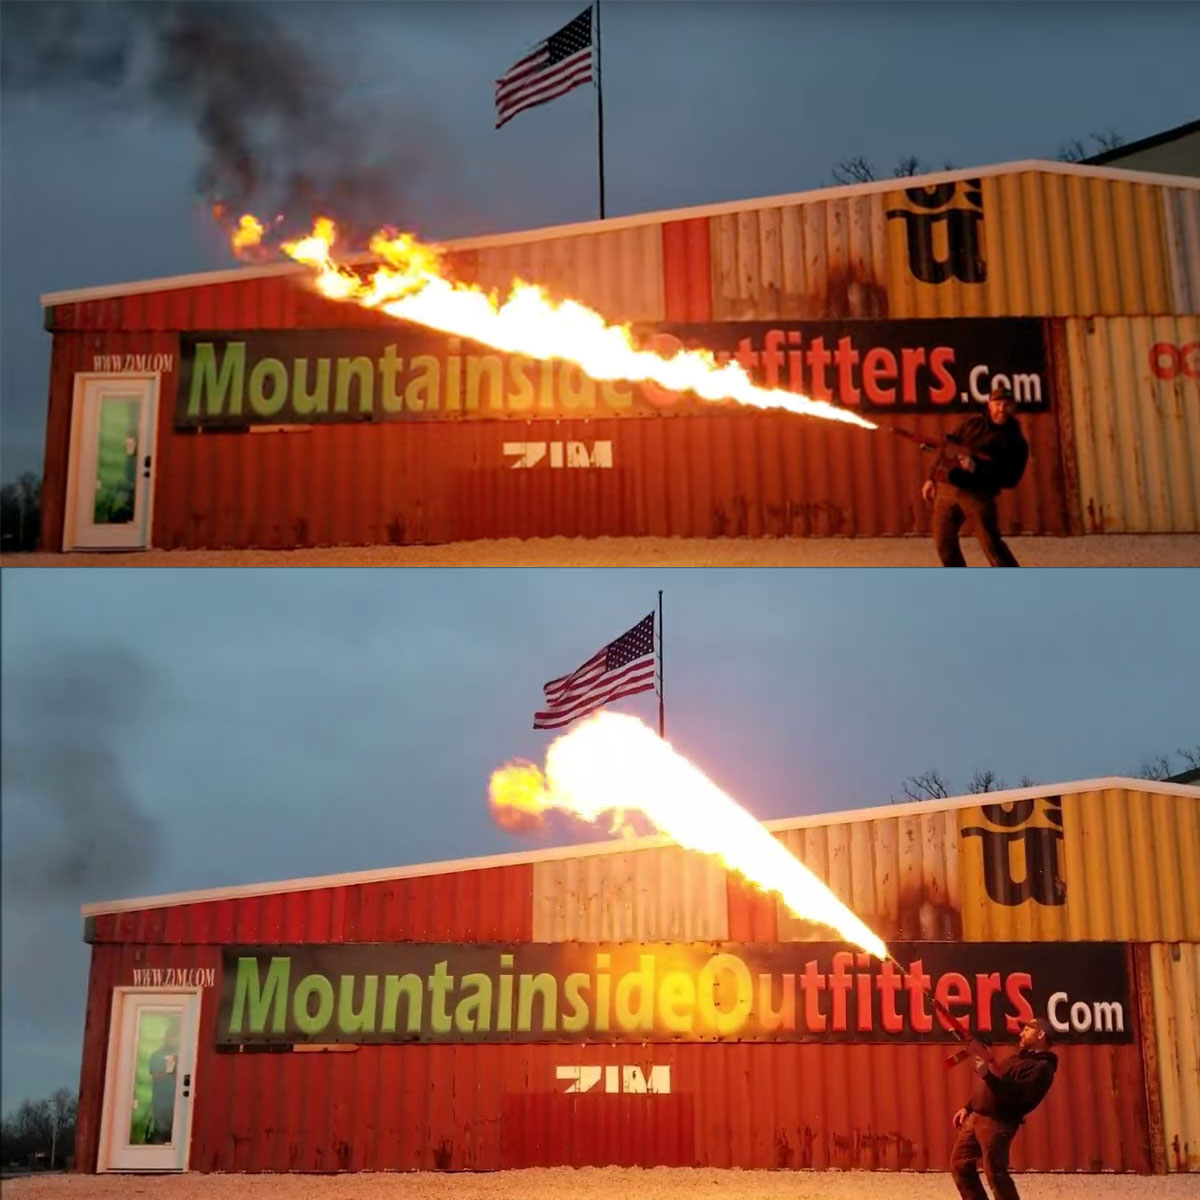 Pyro-15 AR Flamethrower - In Action